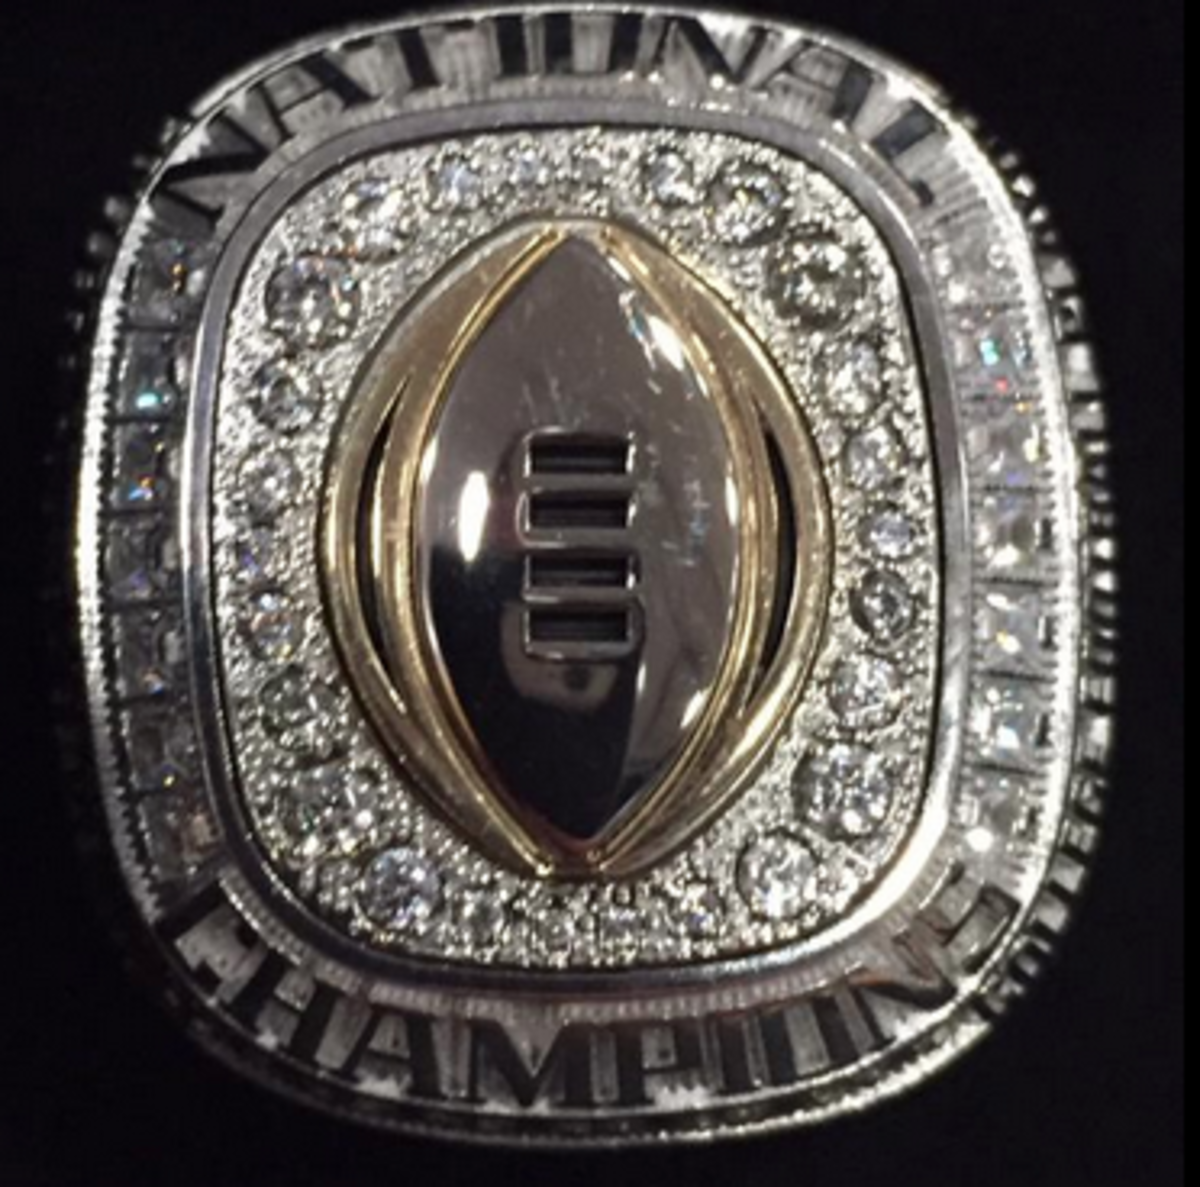 Ohio State's 2014 national championship ring.